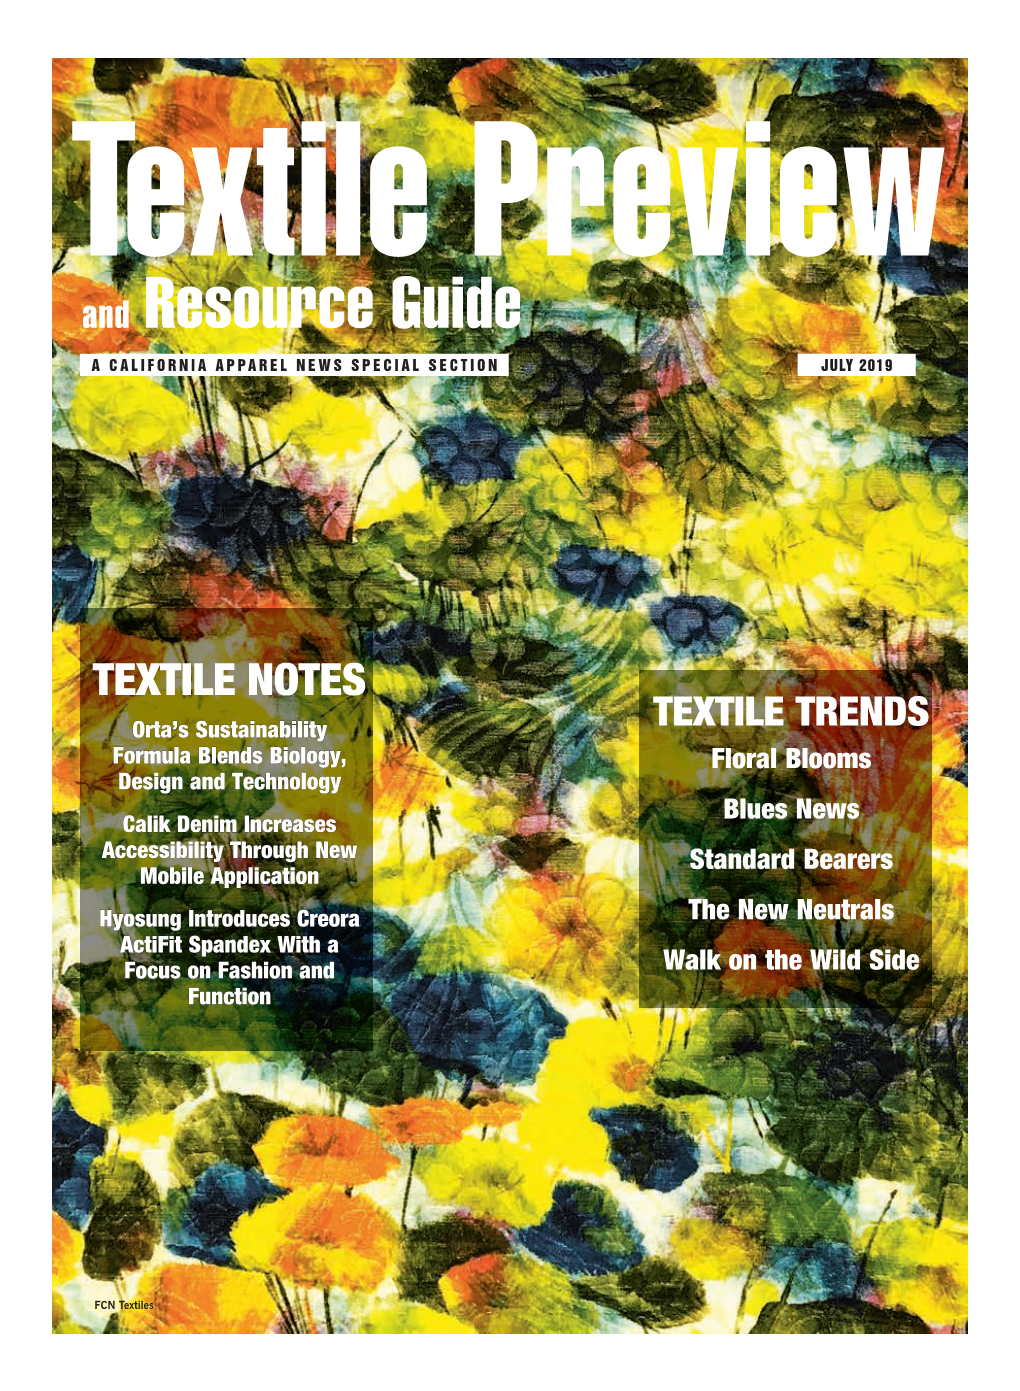 And Resource Guide a CALIFORNIA APPAREL NEWS SPECIAL SECTION JULY 2019